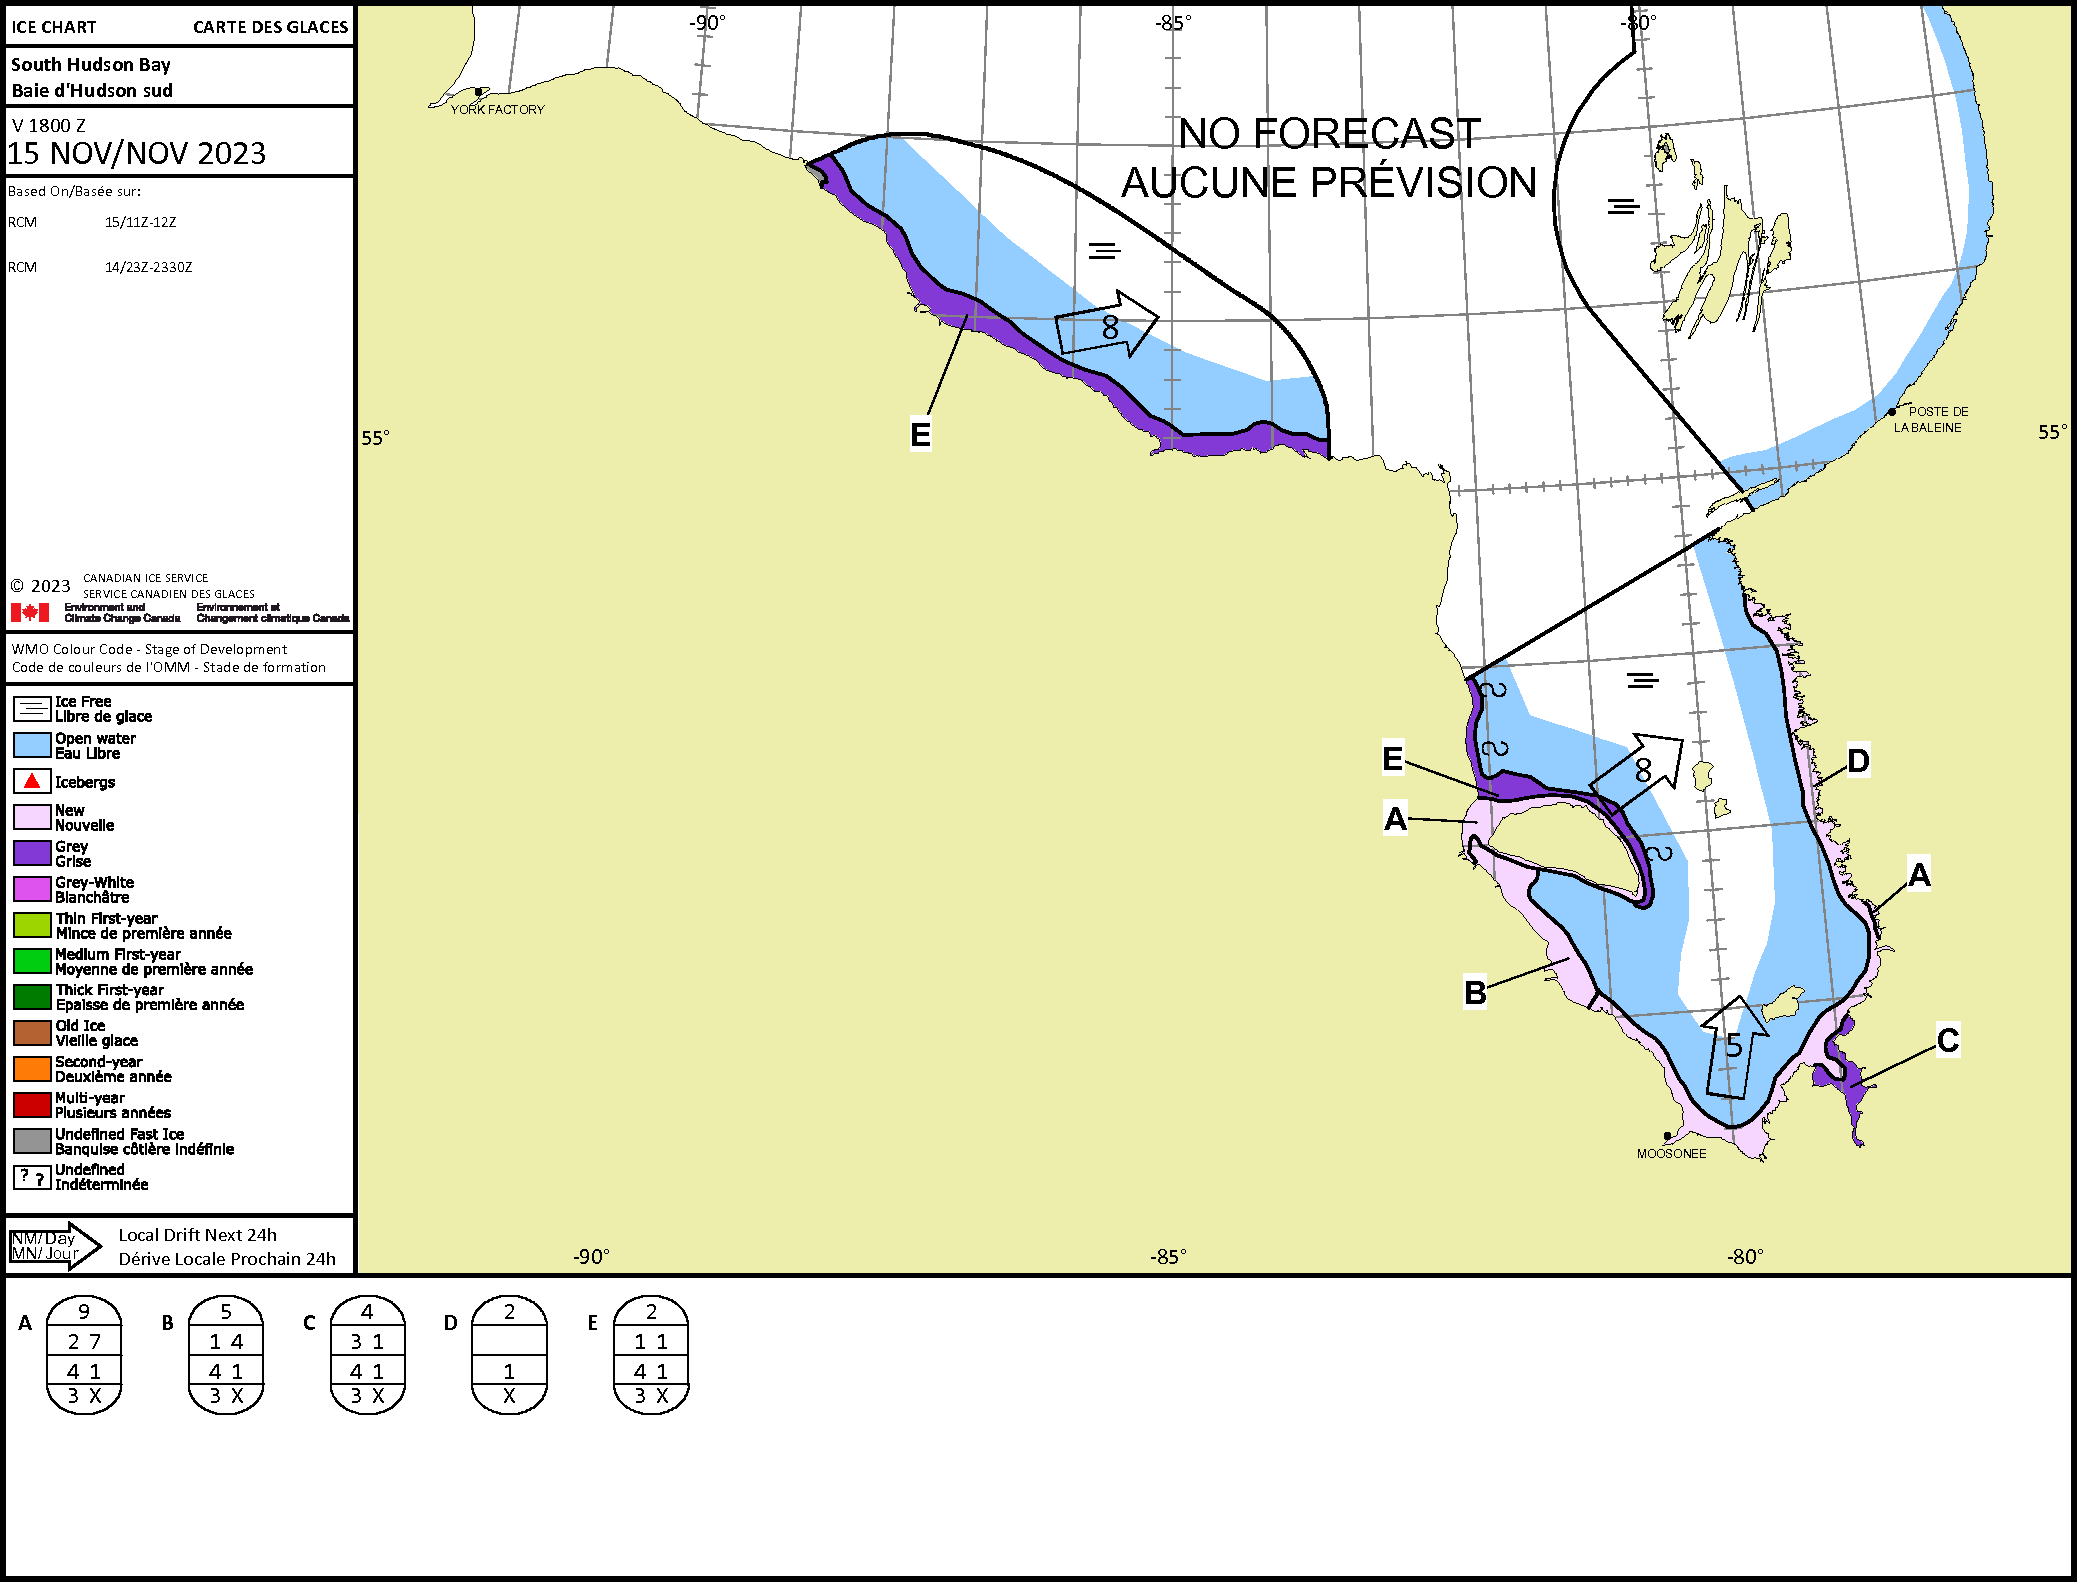 Number of Hudson's Bay locations in Canada in 2023